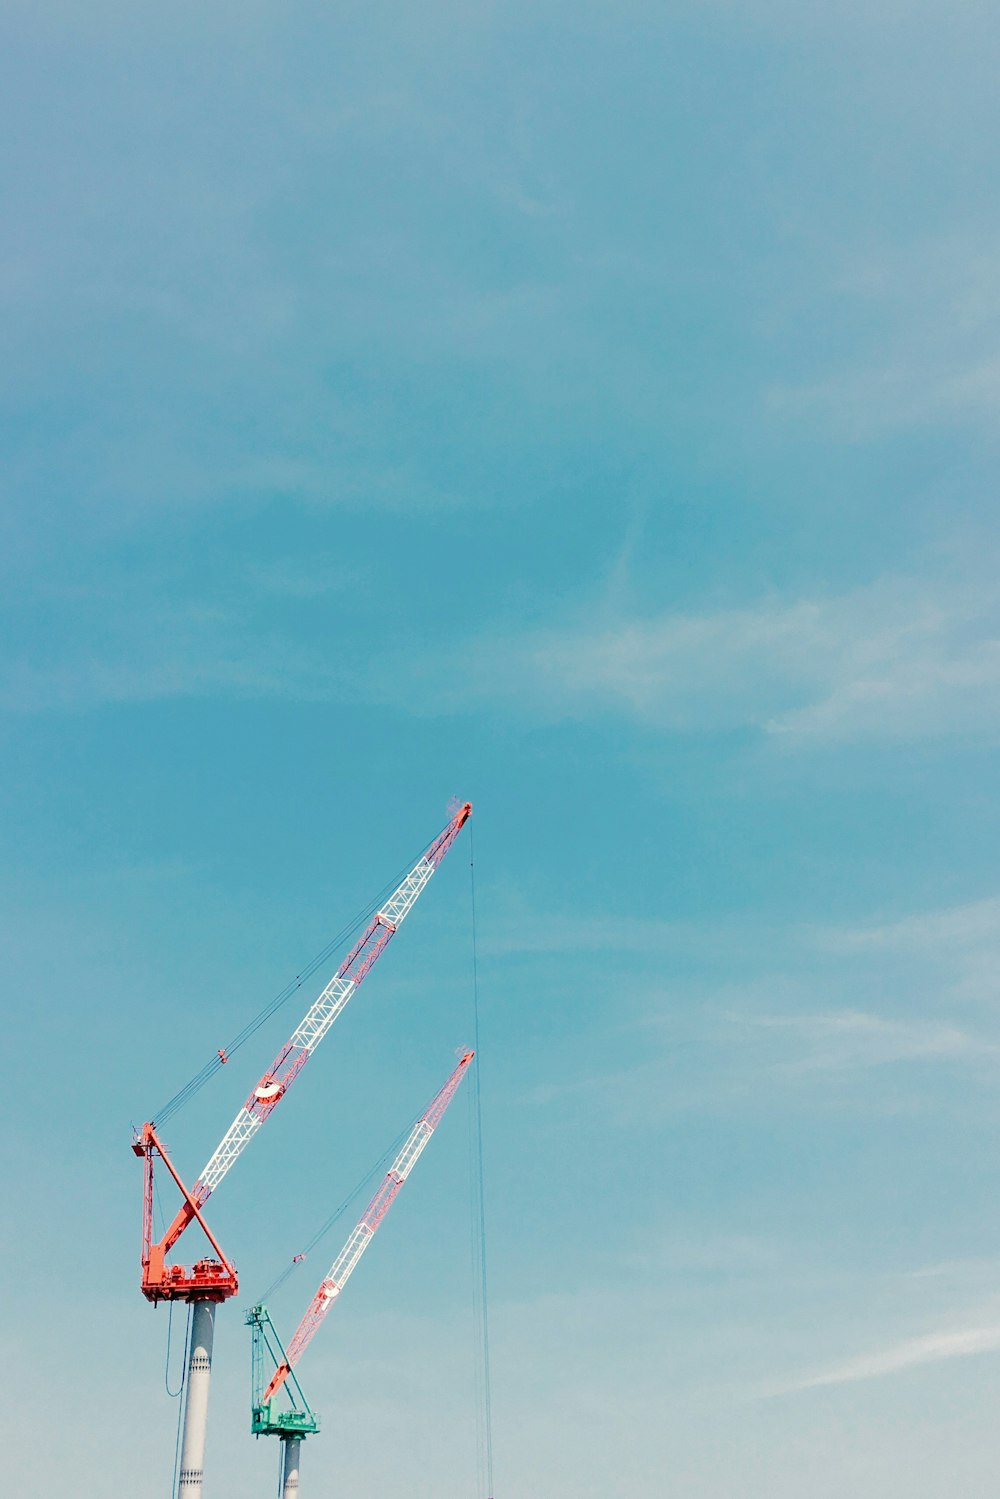 red and green steel cranes during daytime